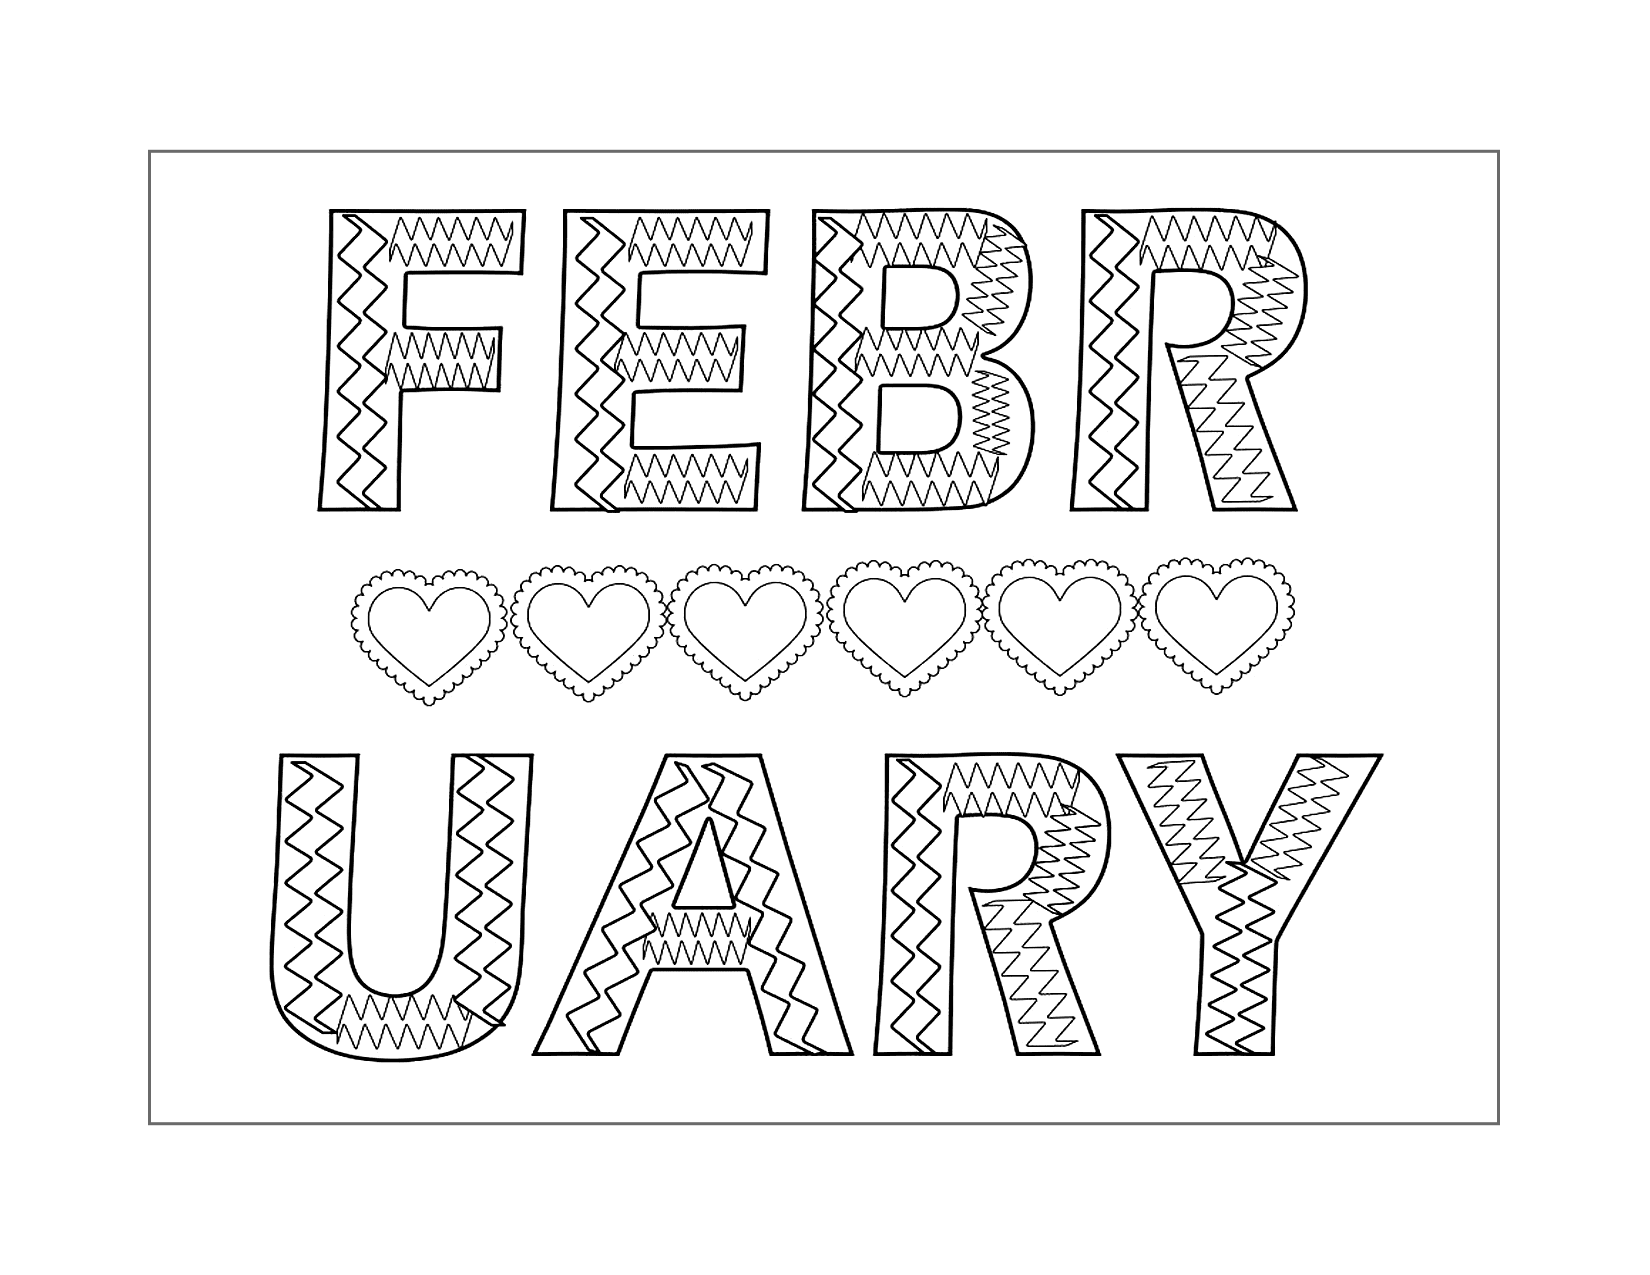 February Coloring Page